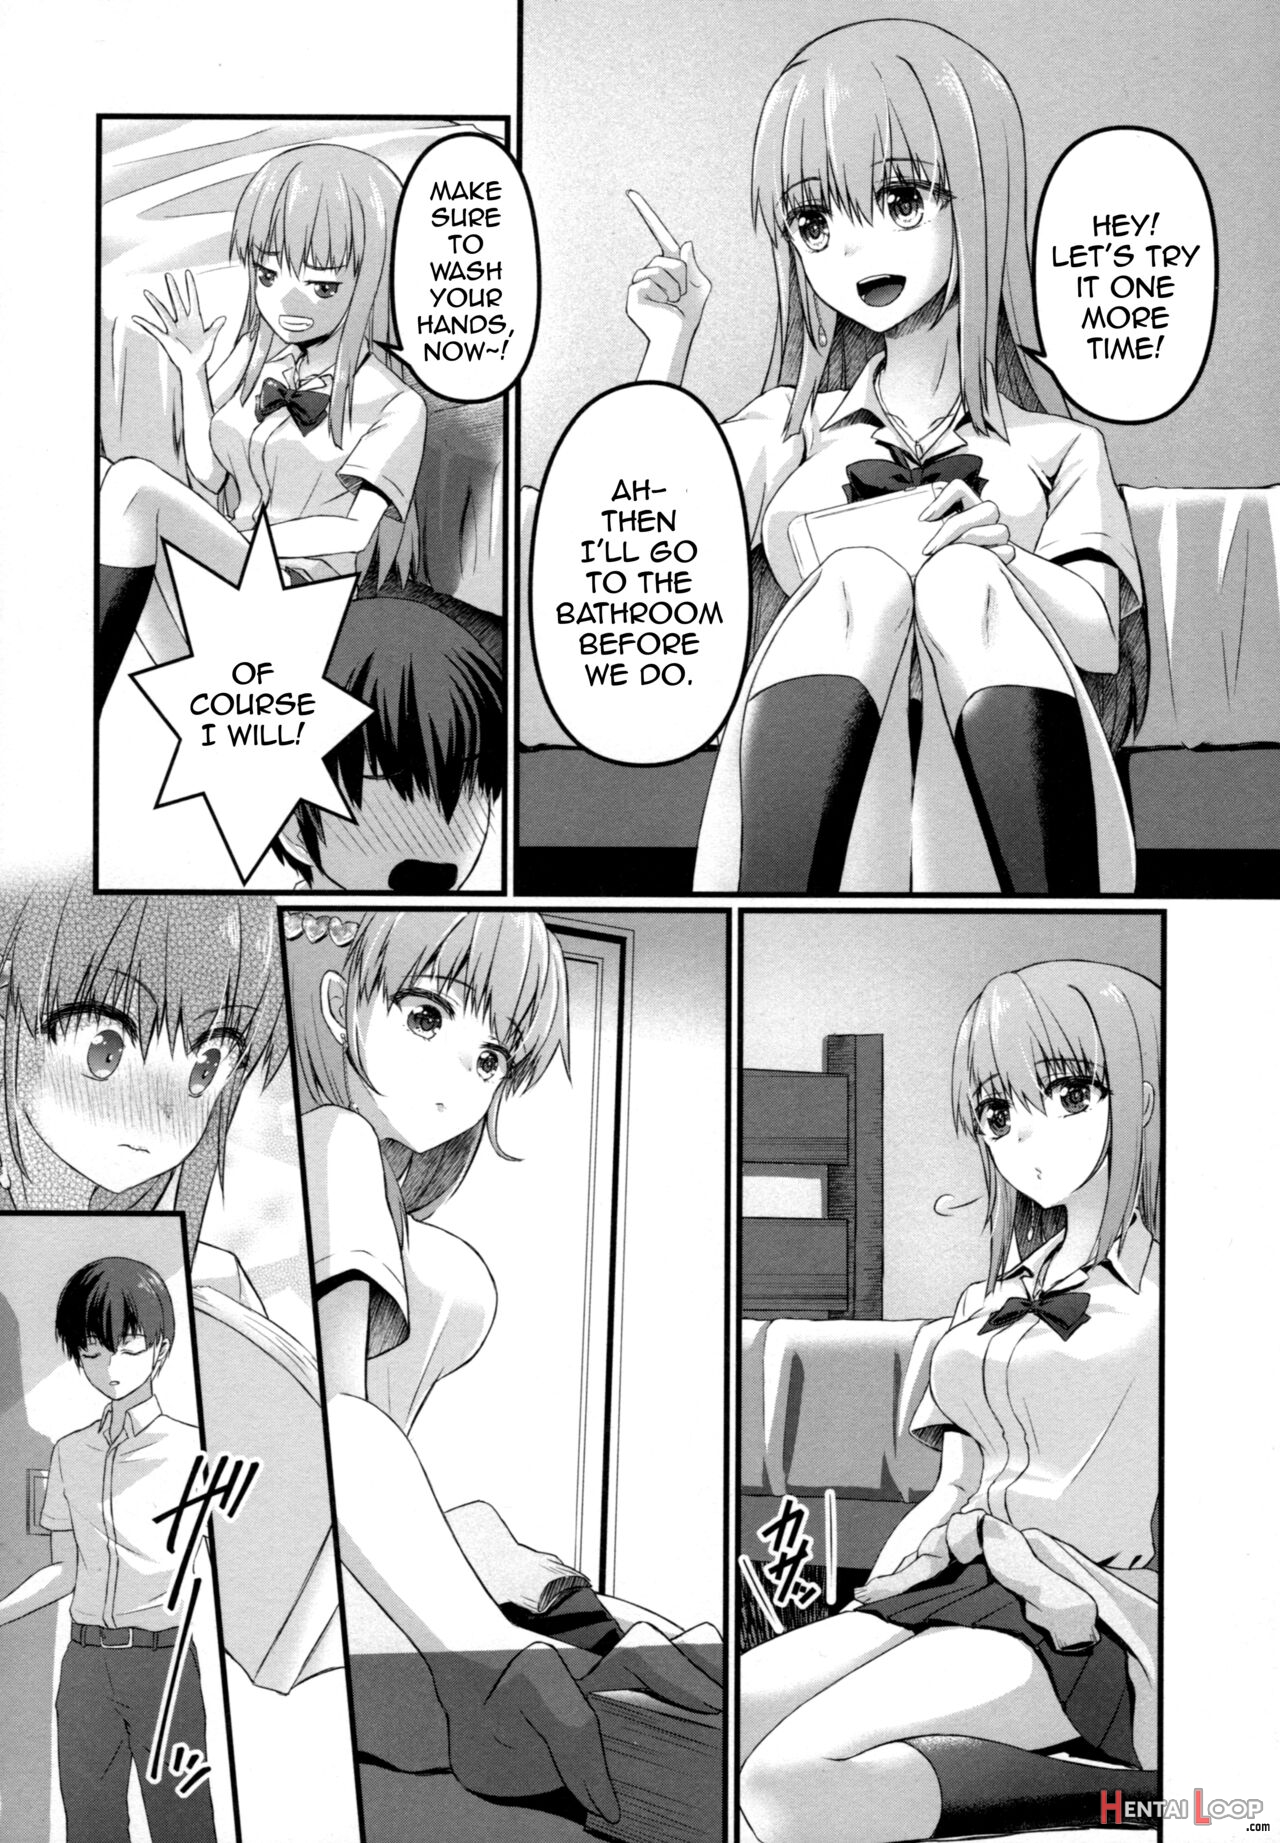 This Gal Tries To Beat An Otaku At Both Games And Sex page 5